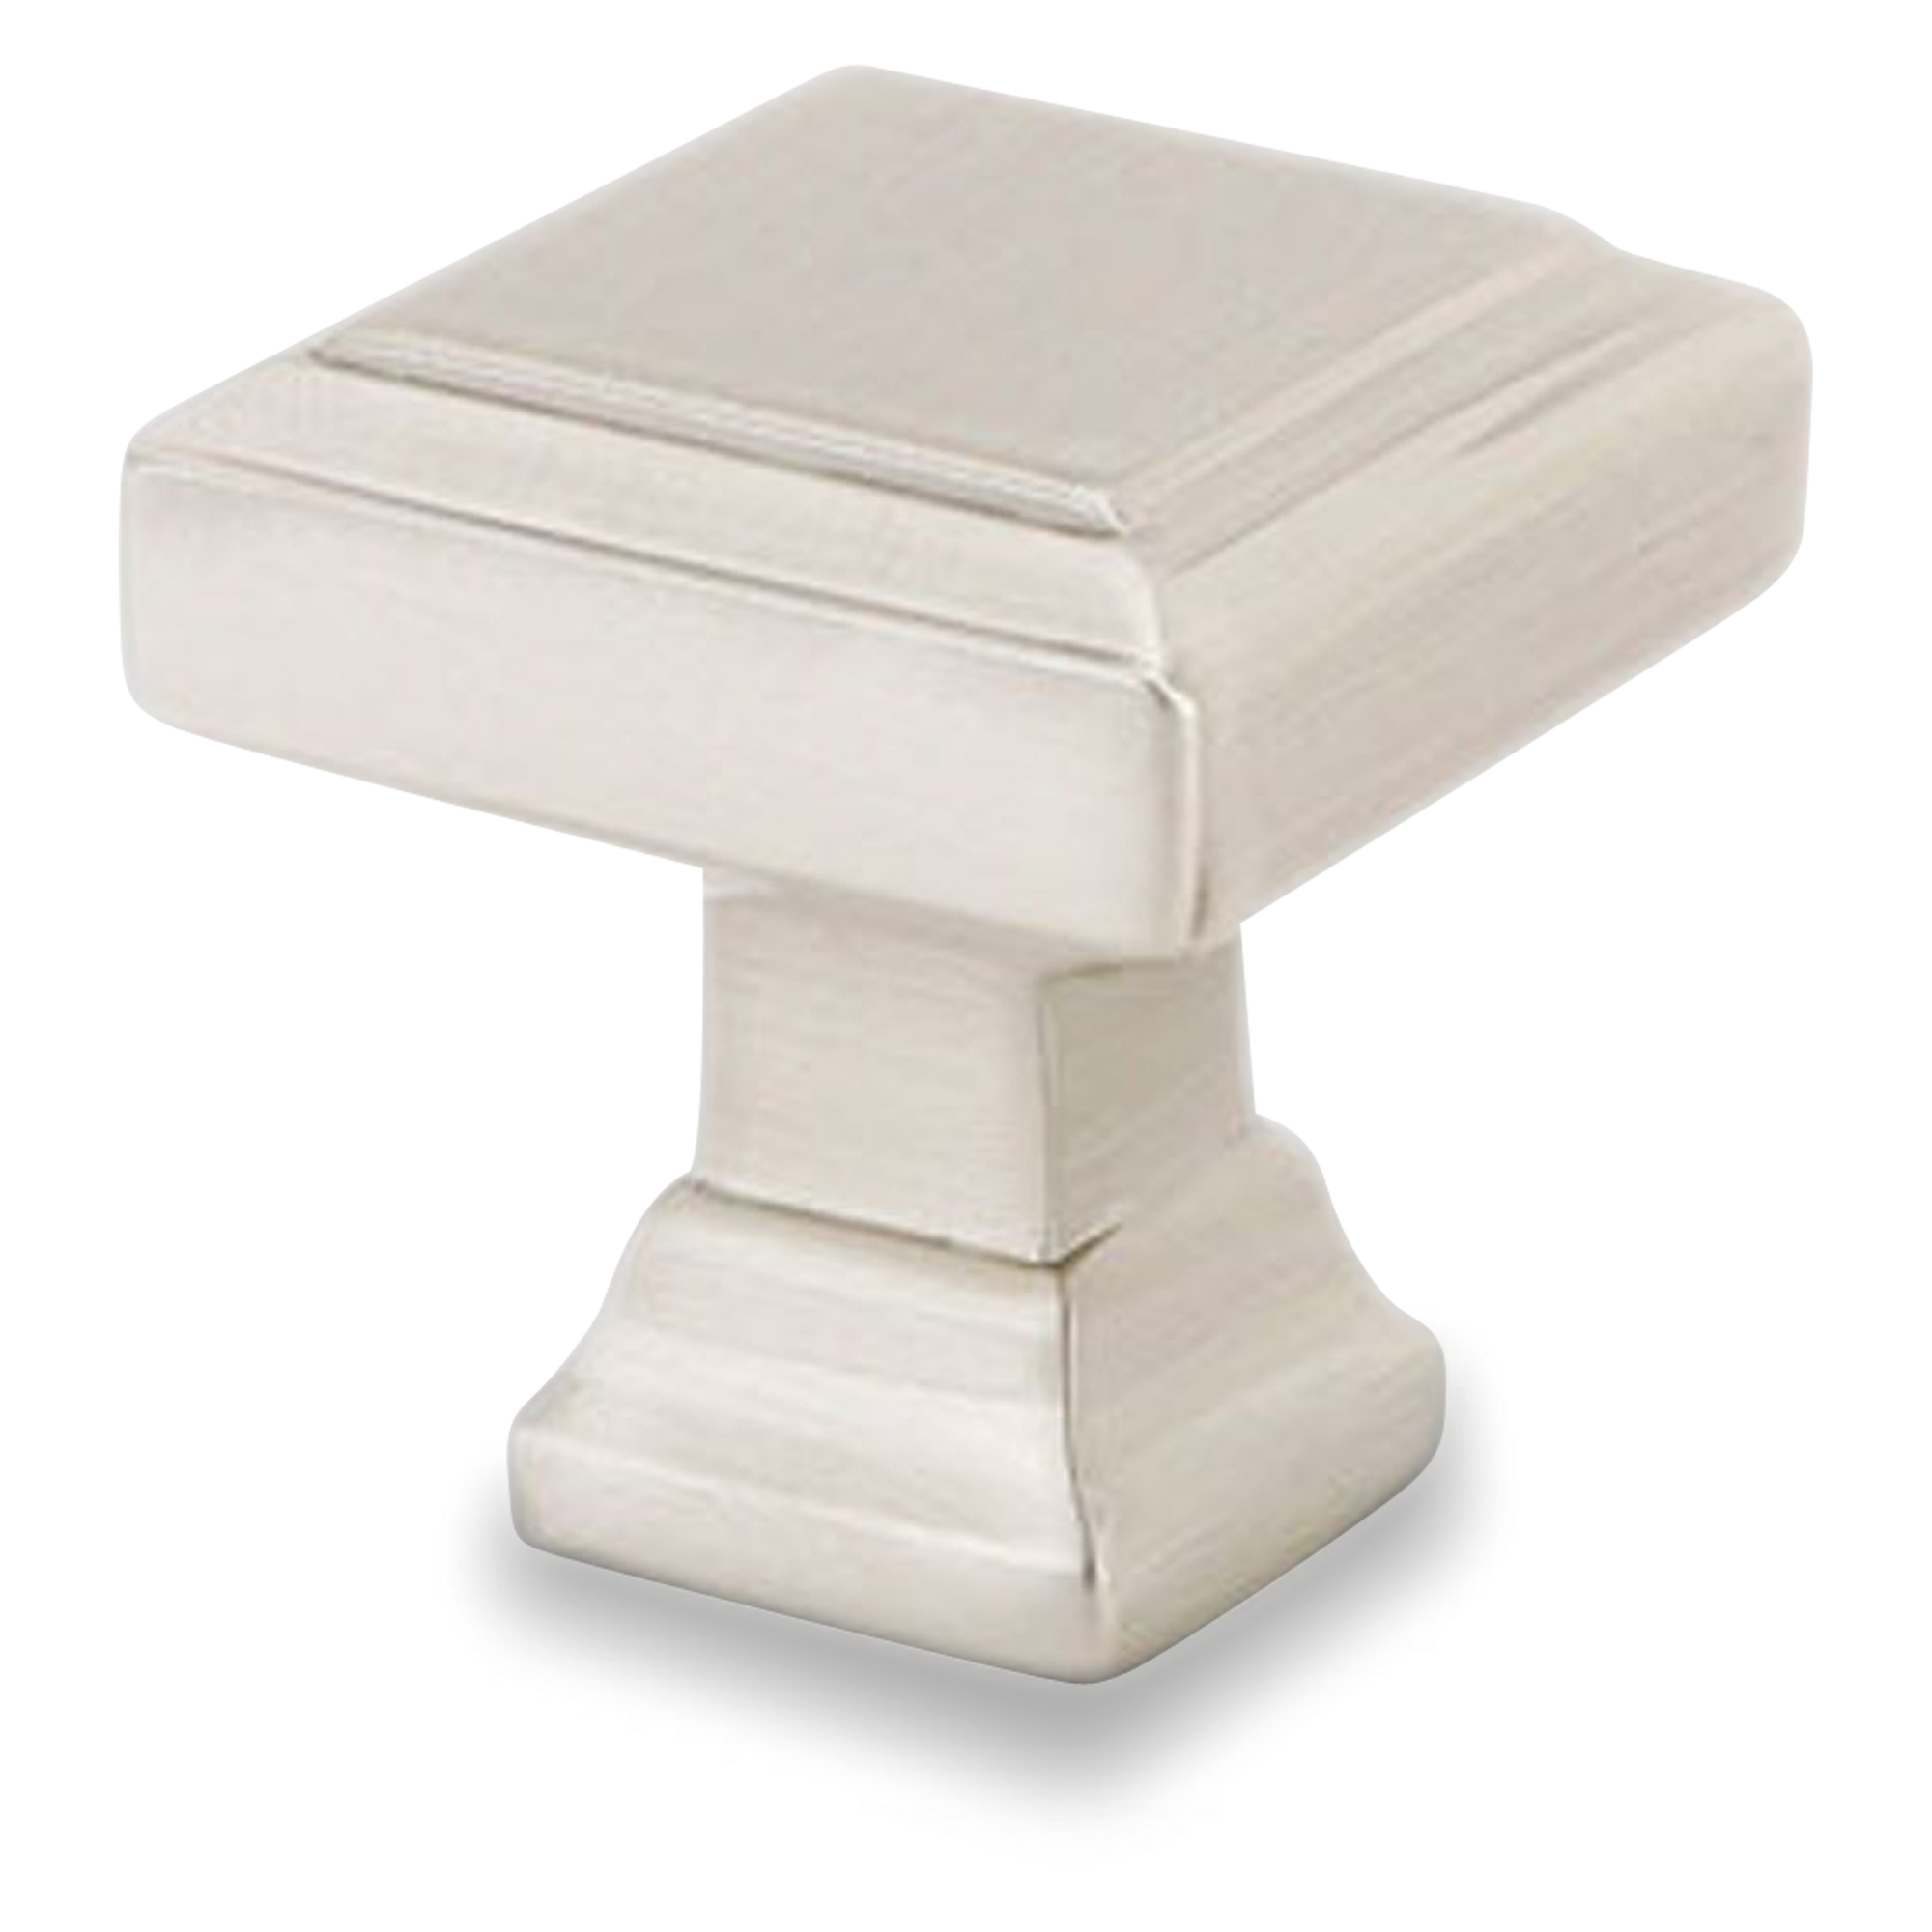 A sophisticated and traditional square knob with geometric details.